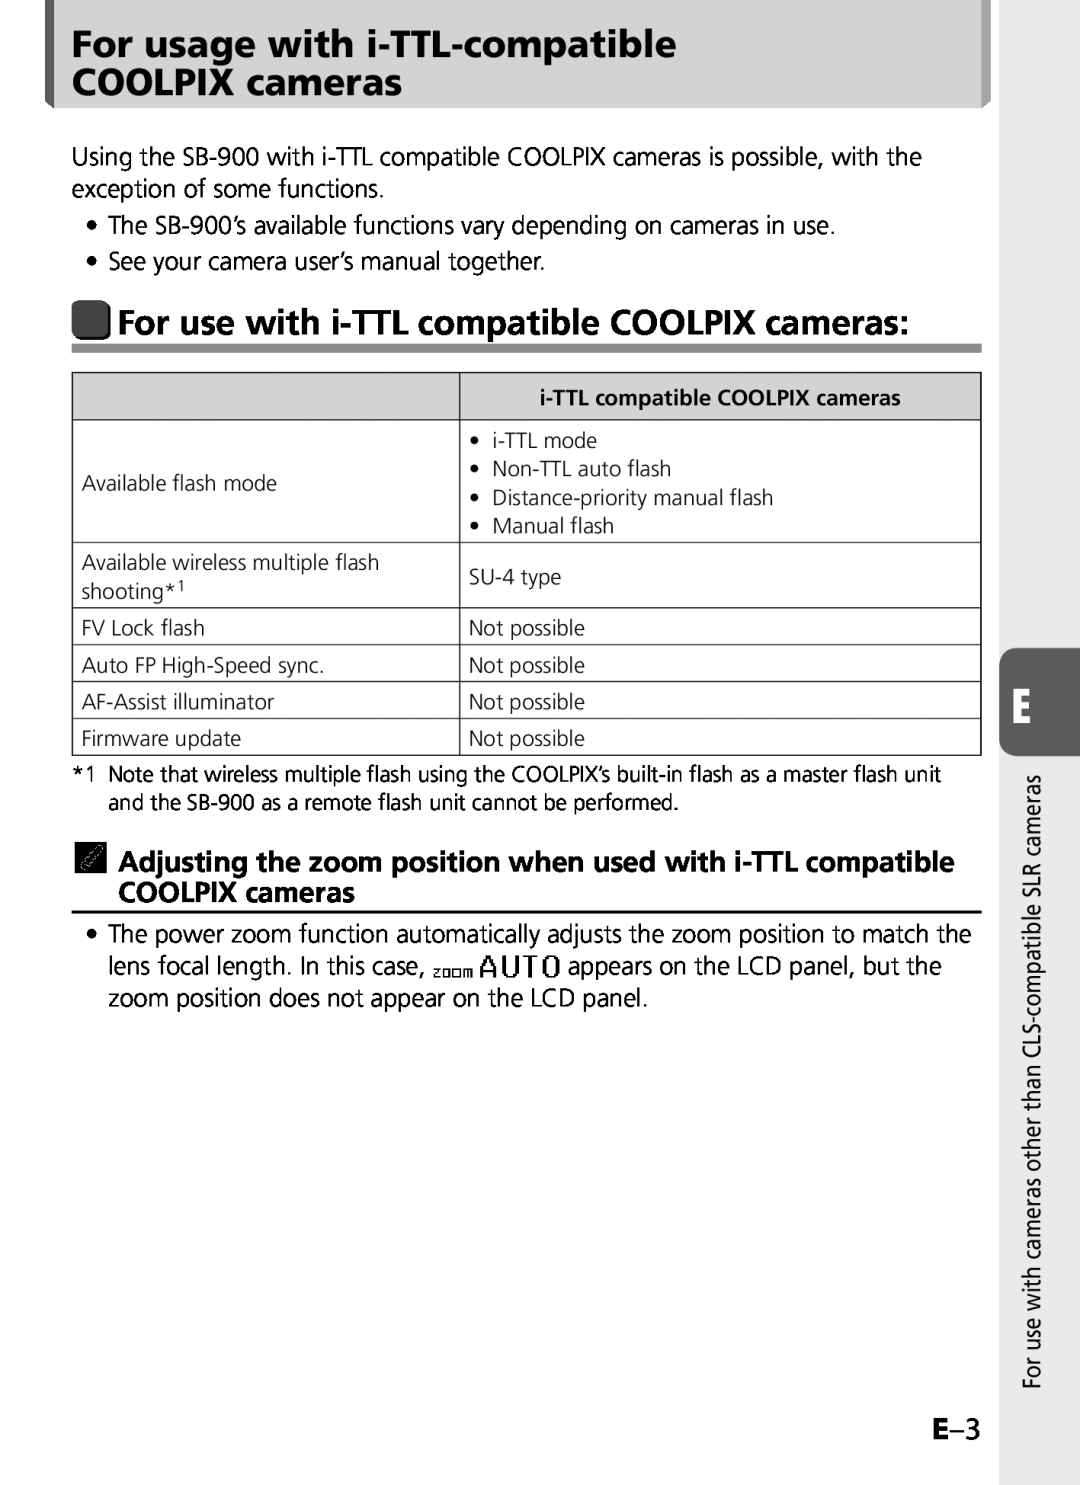 Univex SB-900 user manual For usage with i-TTL-compatible COOLPIX cameras, For use with i-TTLcompatible COOLPIX cameras 